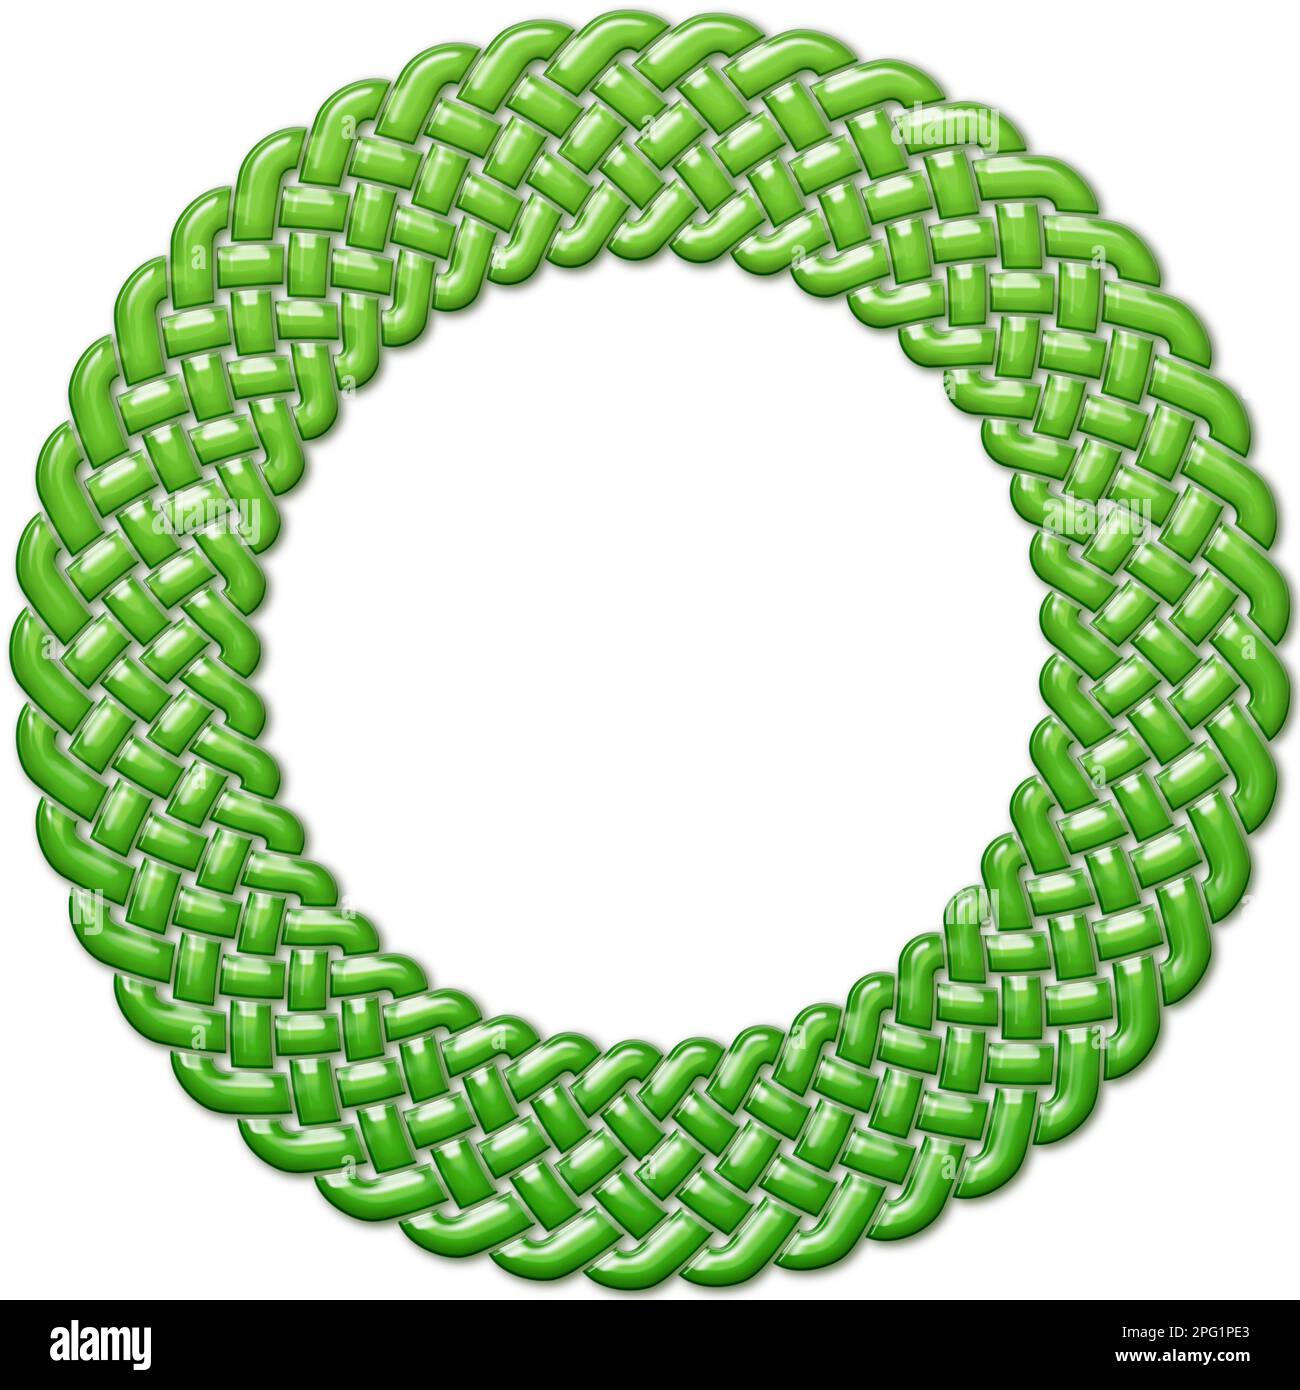 Circular border made with Celtic knots for use in designs for St. Patrick's Day. Stock Photo